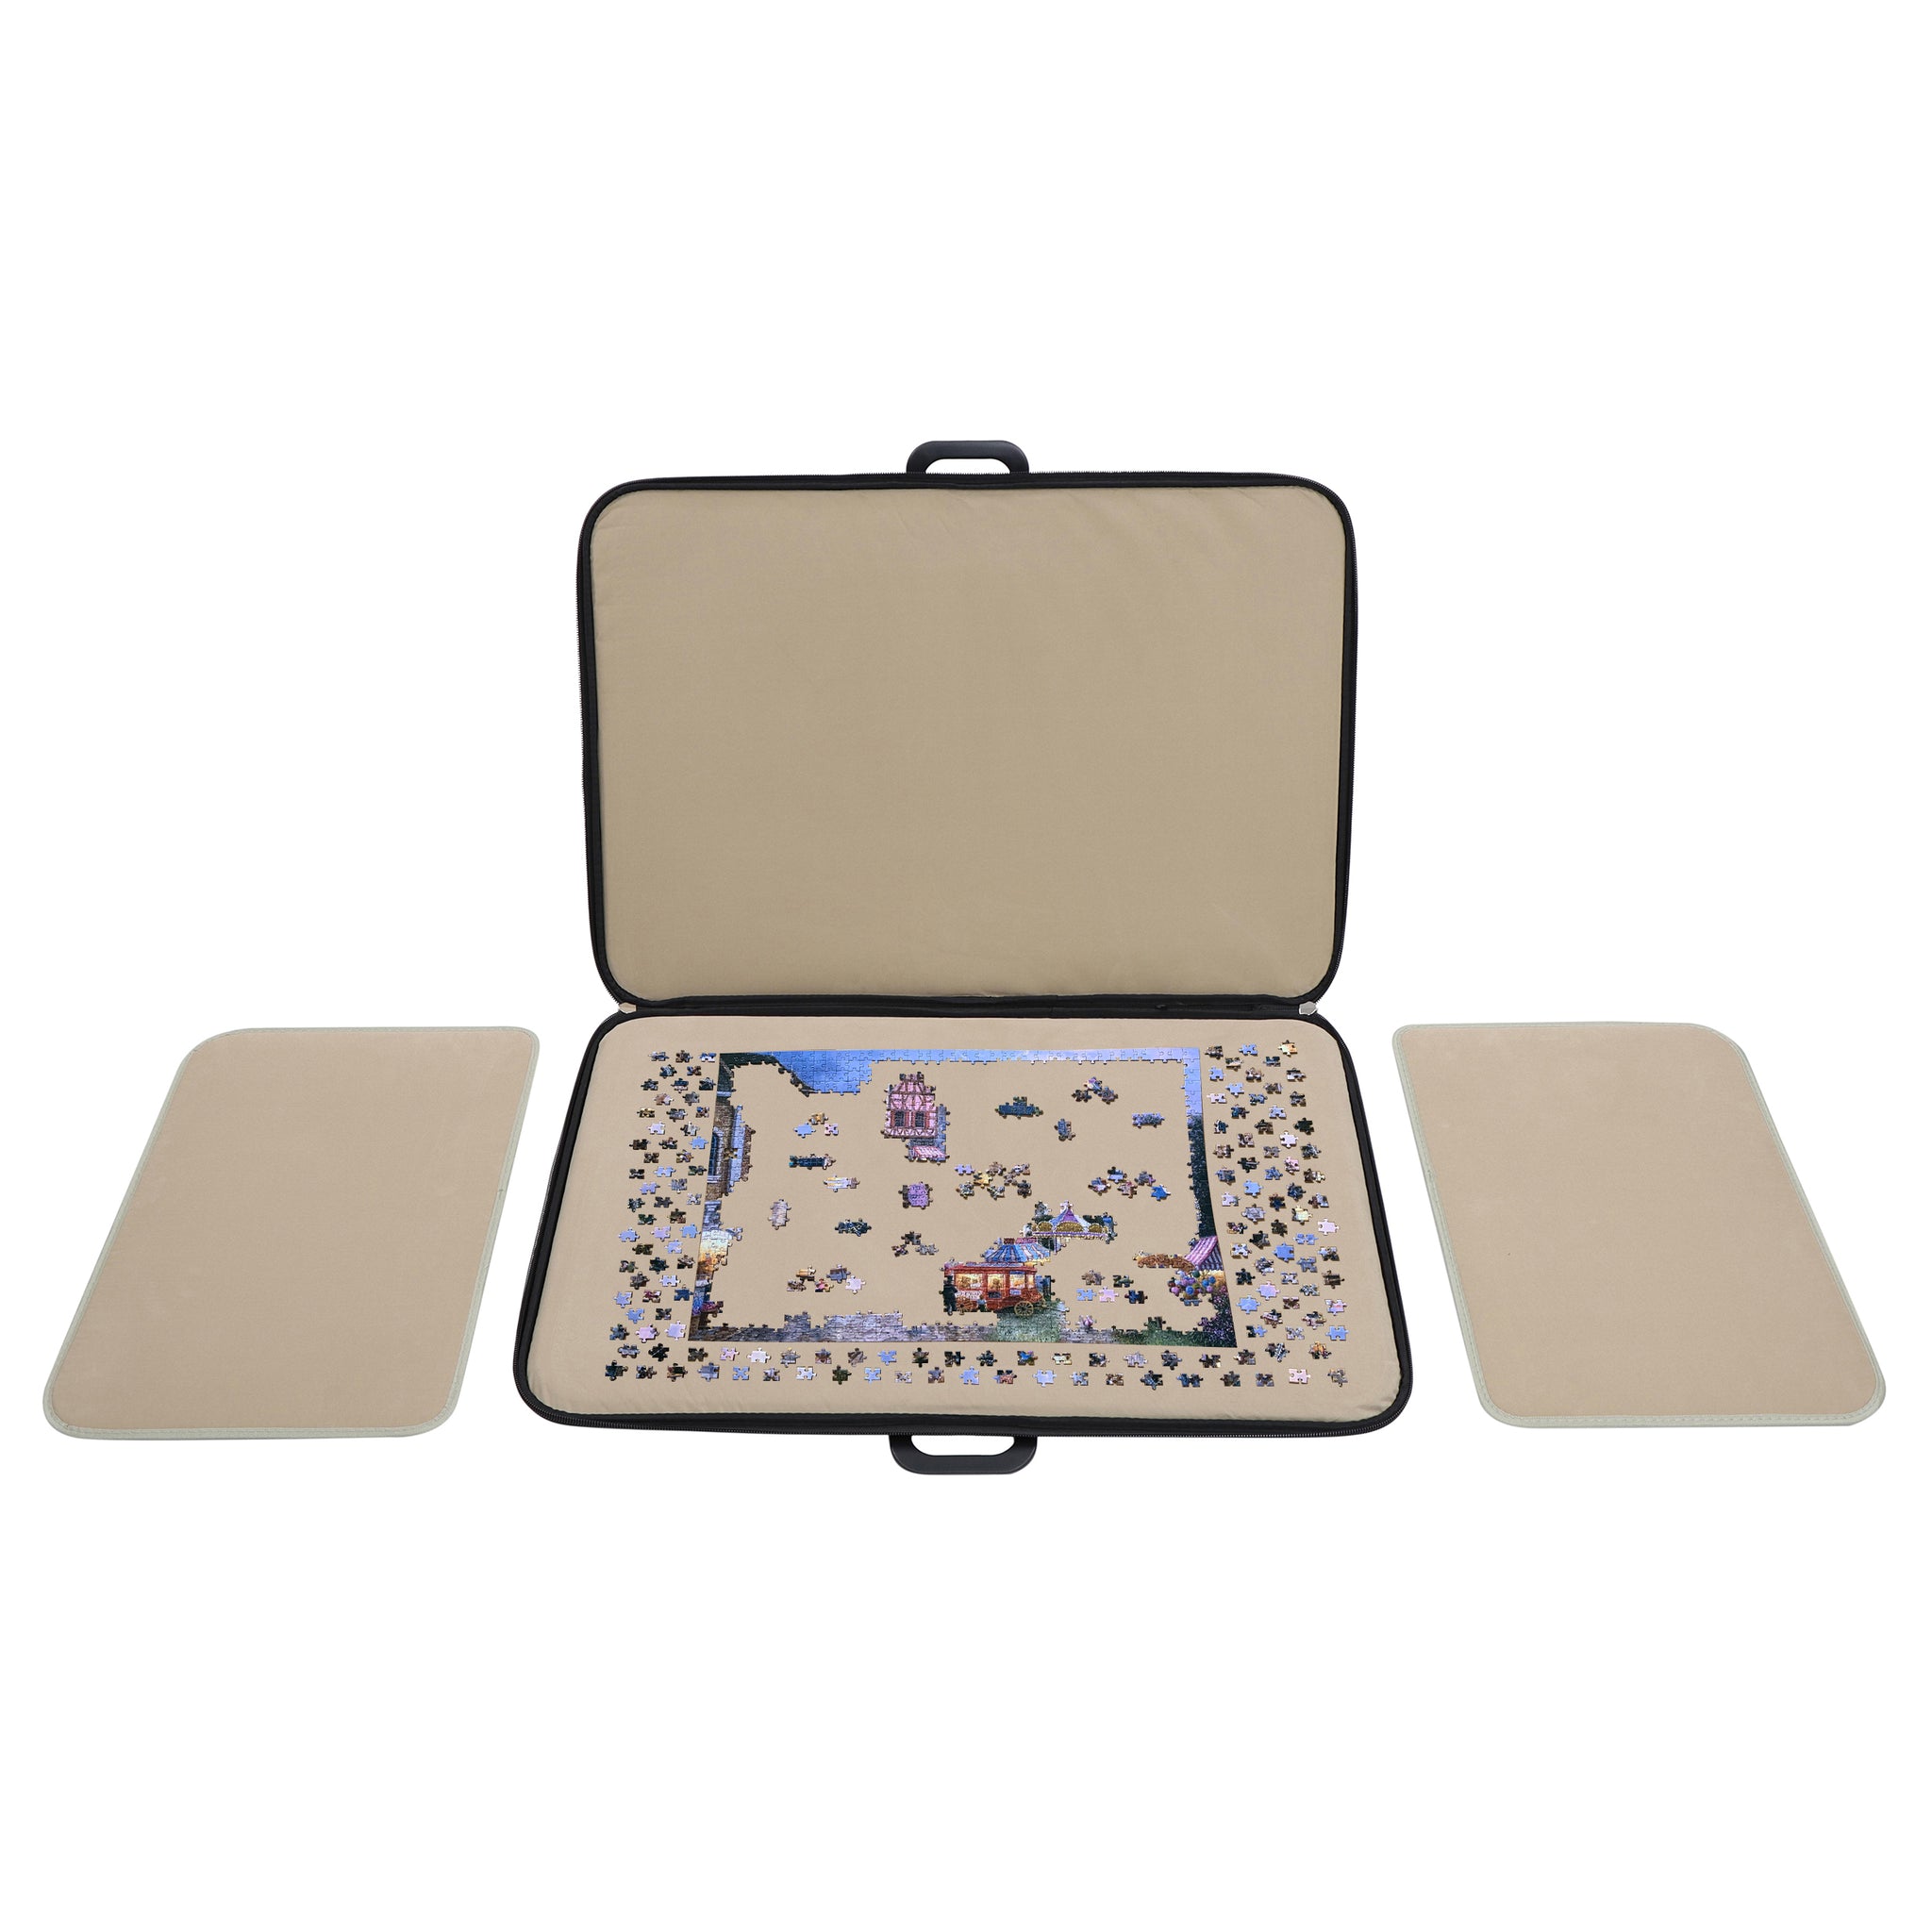 HZW Jigsaw Puzzle Case Portable Puzzle Board with Trays and Cover 1000 –  ToysCentral - Europe